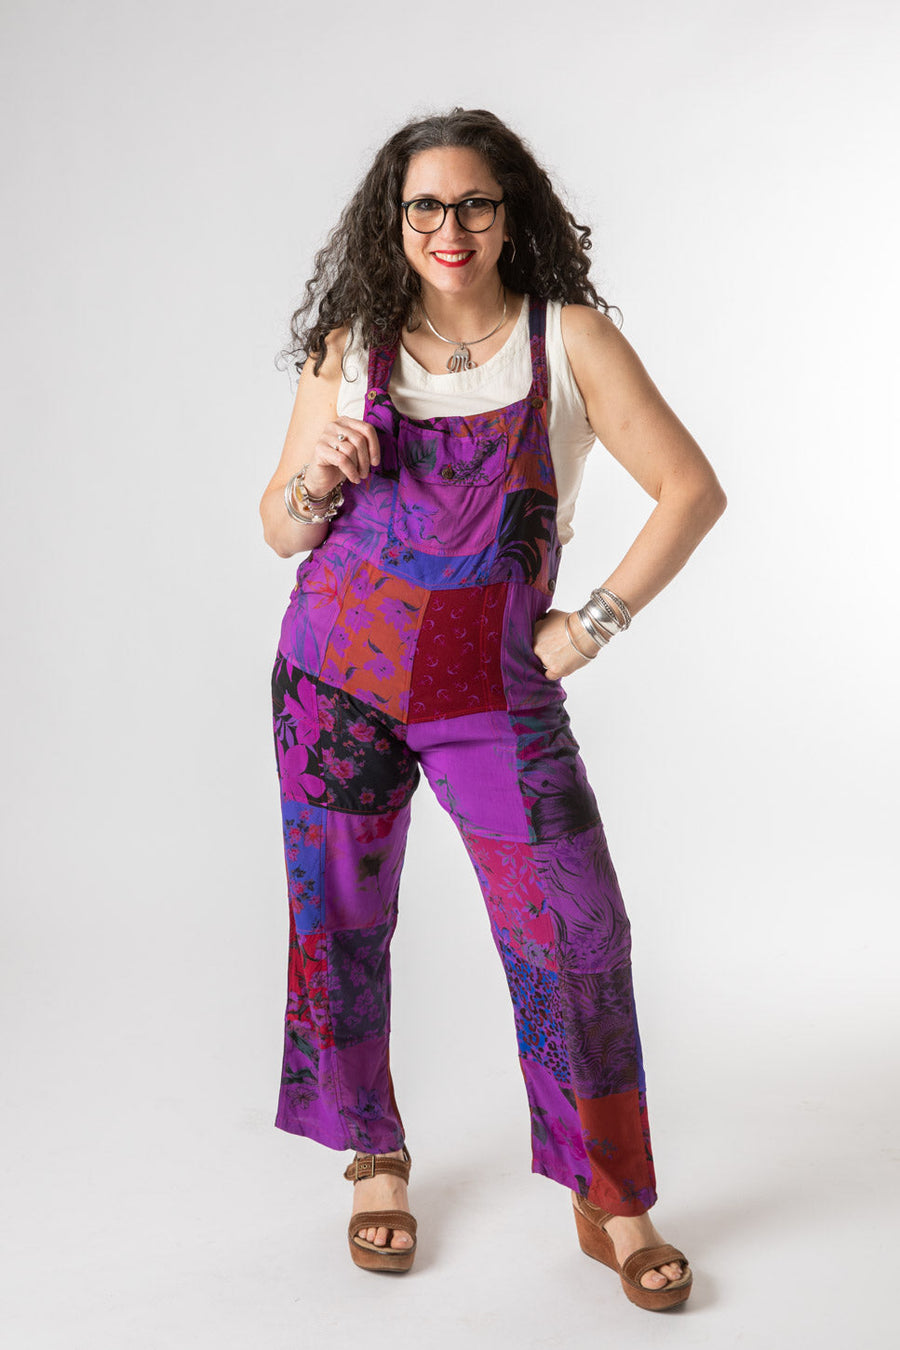 Mexicali Patchwork Unisex Hippy Overalls